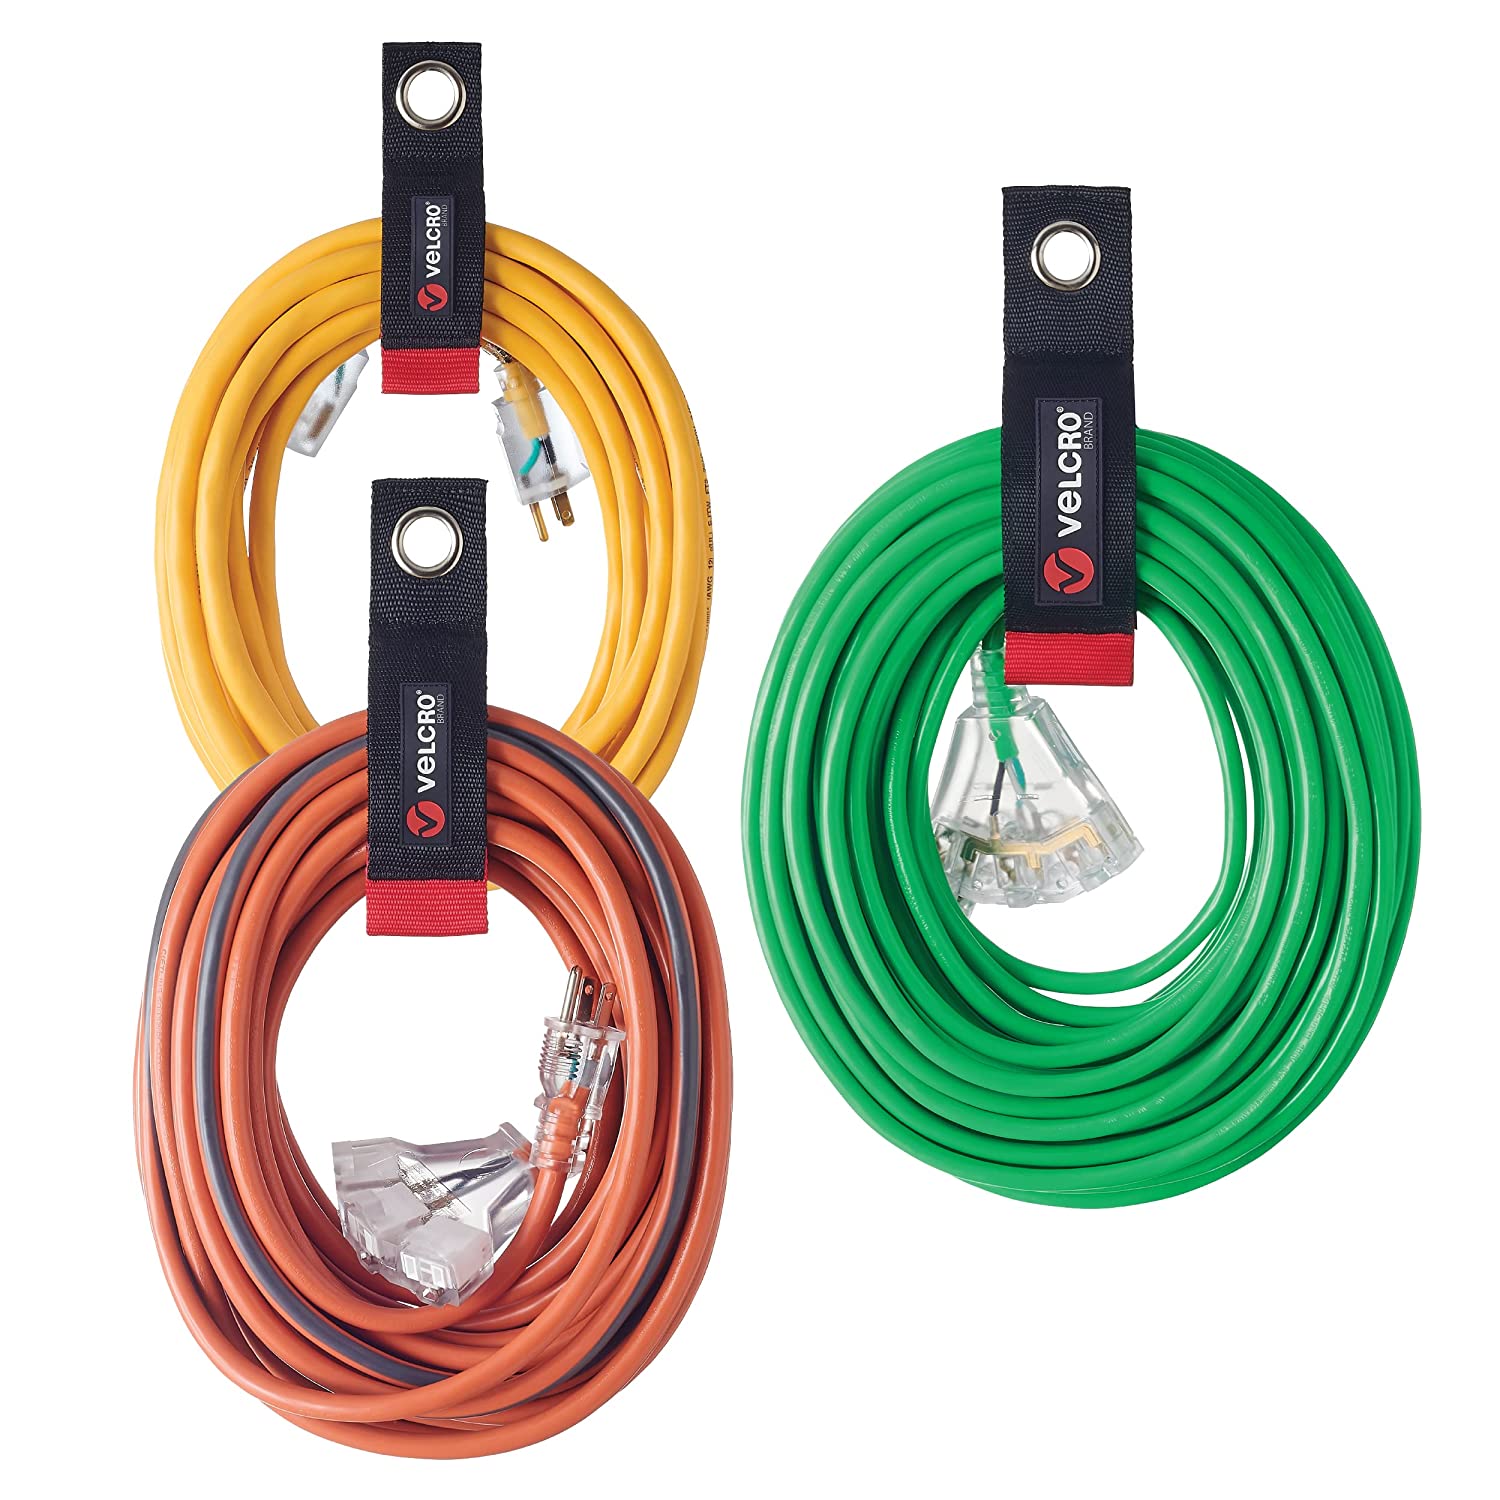 Velcro  Heavy Duty Extension Cord Holder Organizer Pack Each Holds up to 100pounds $11.39